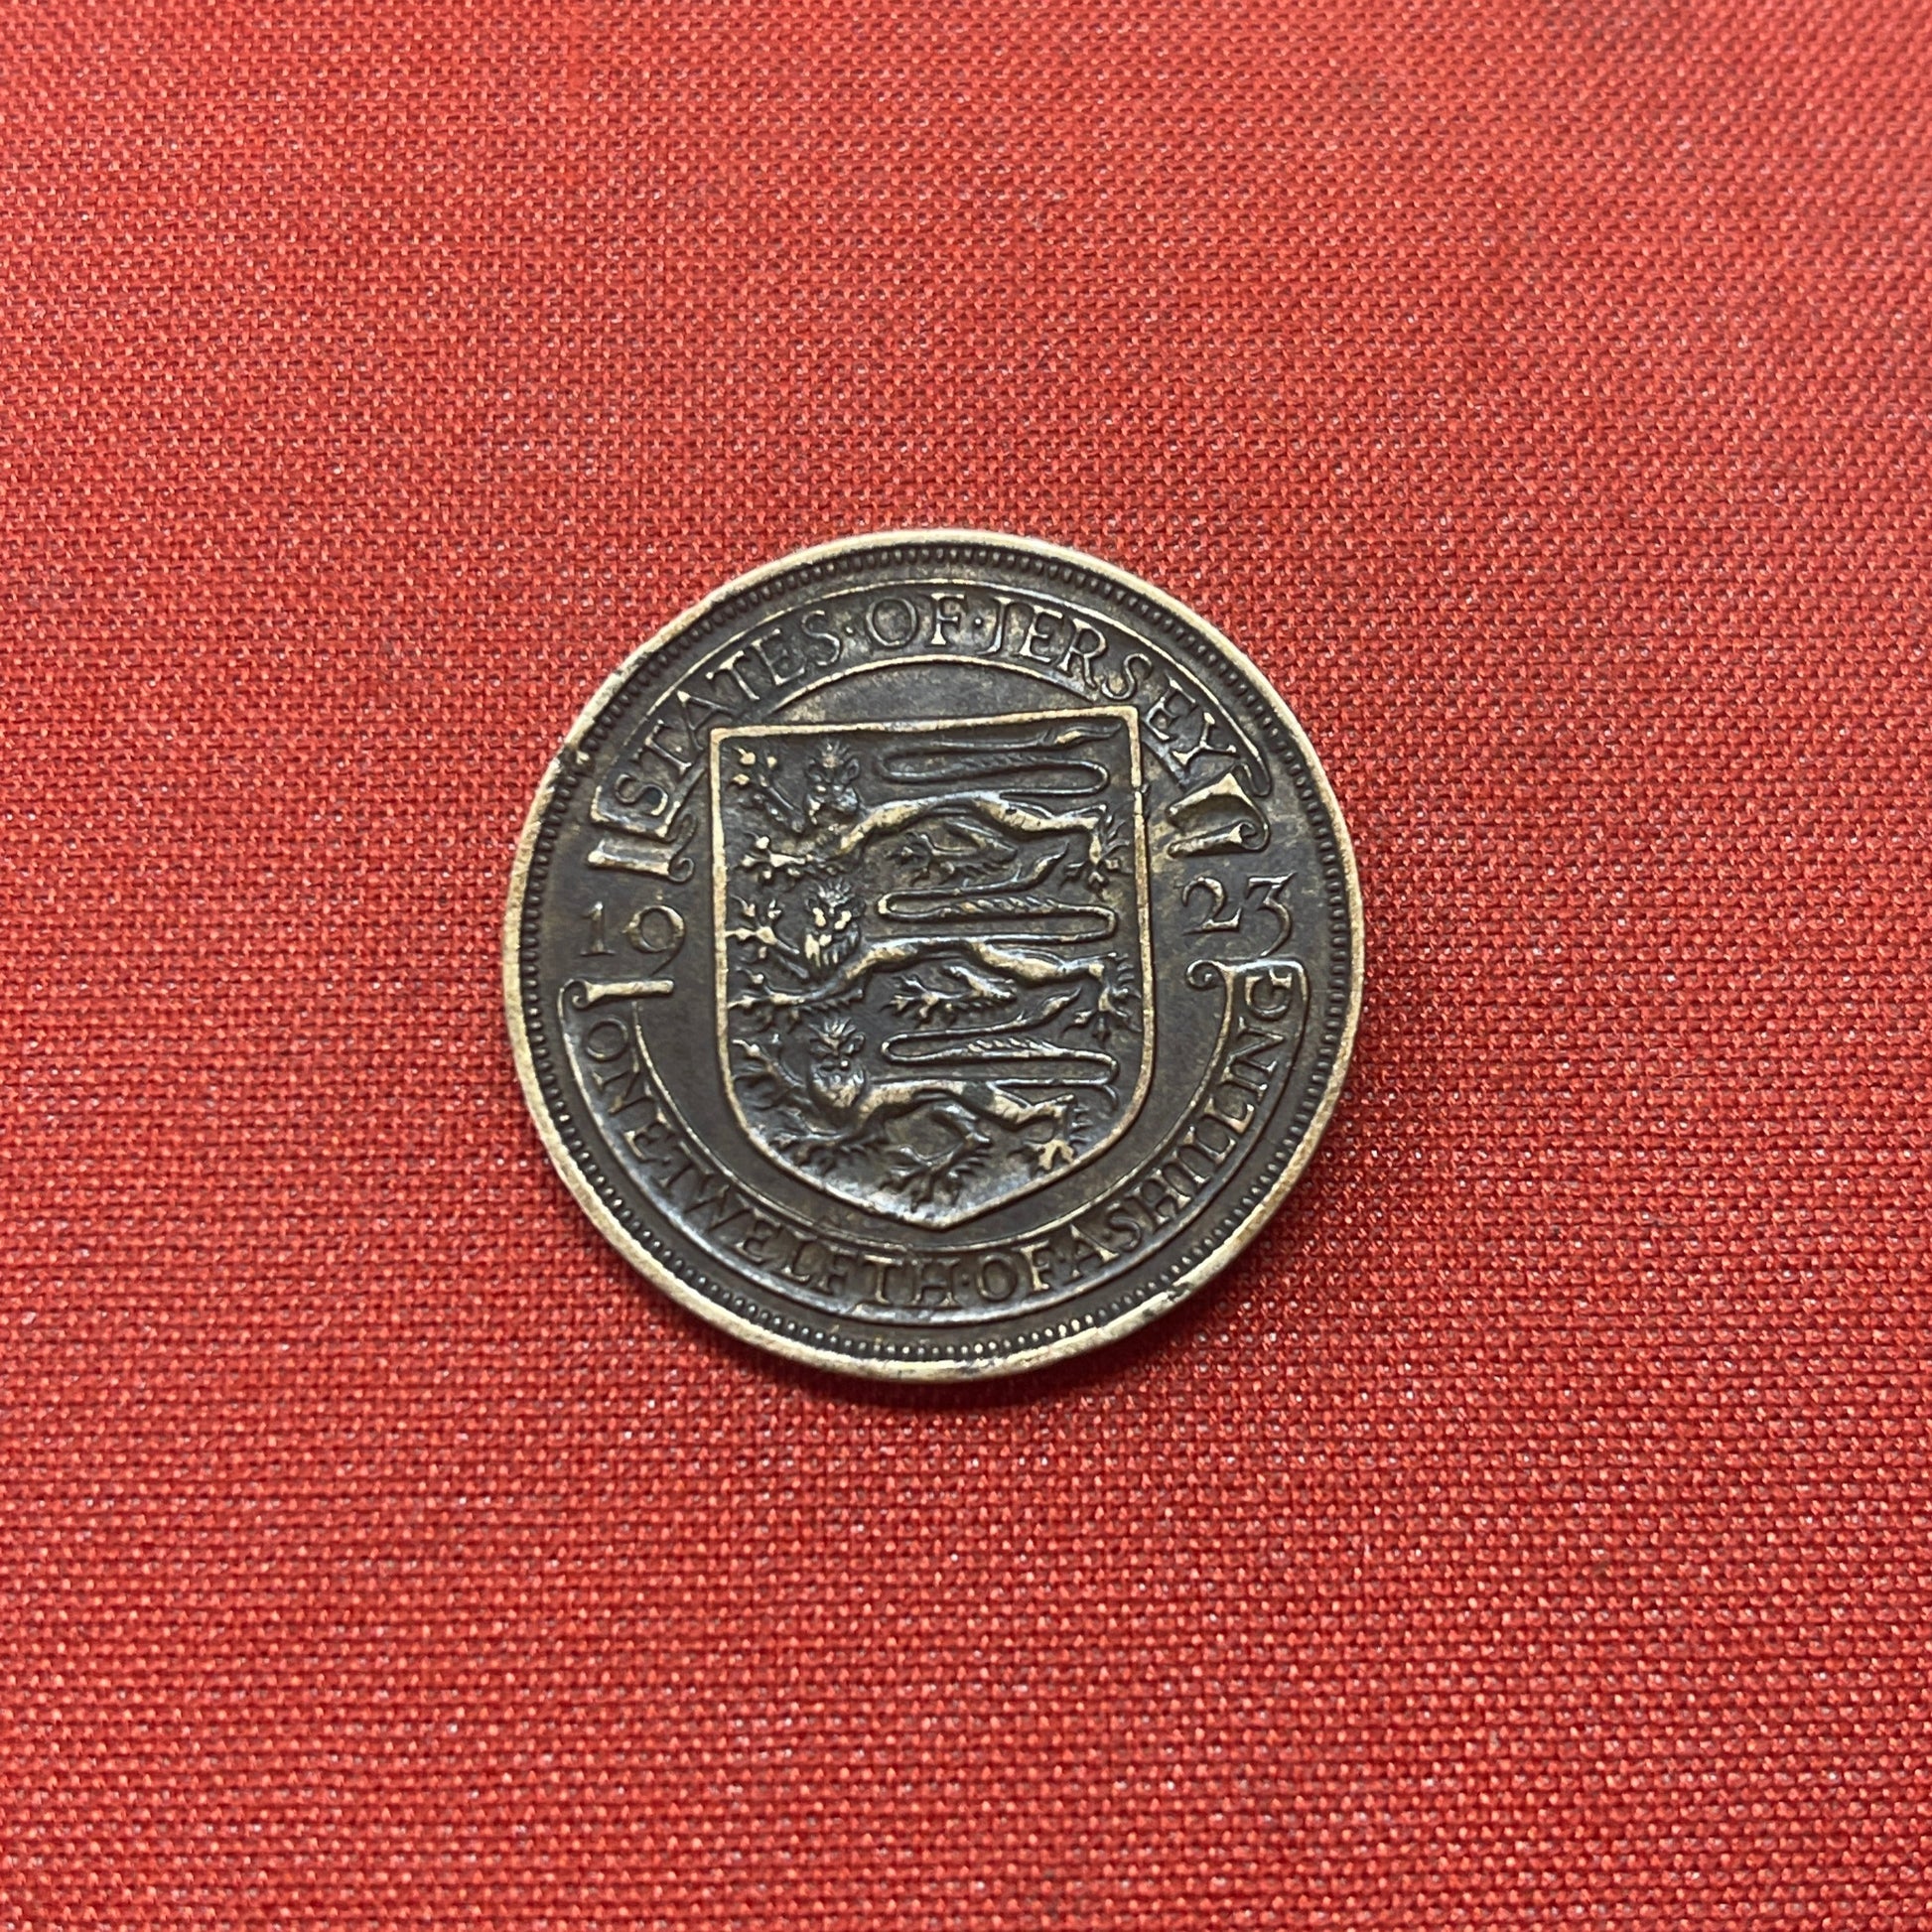 1923 State of Jersey One Twelth Of A Shilling